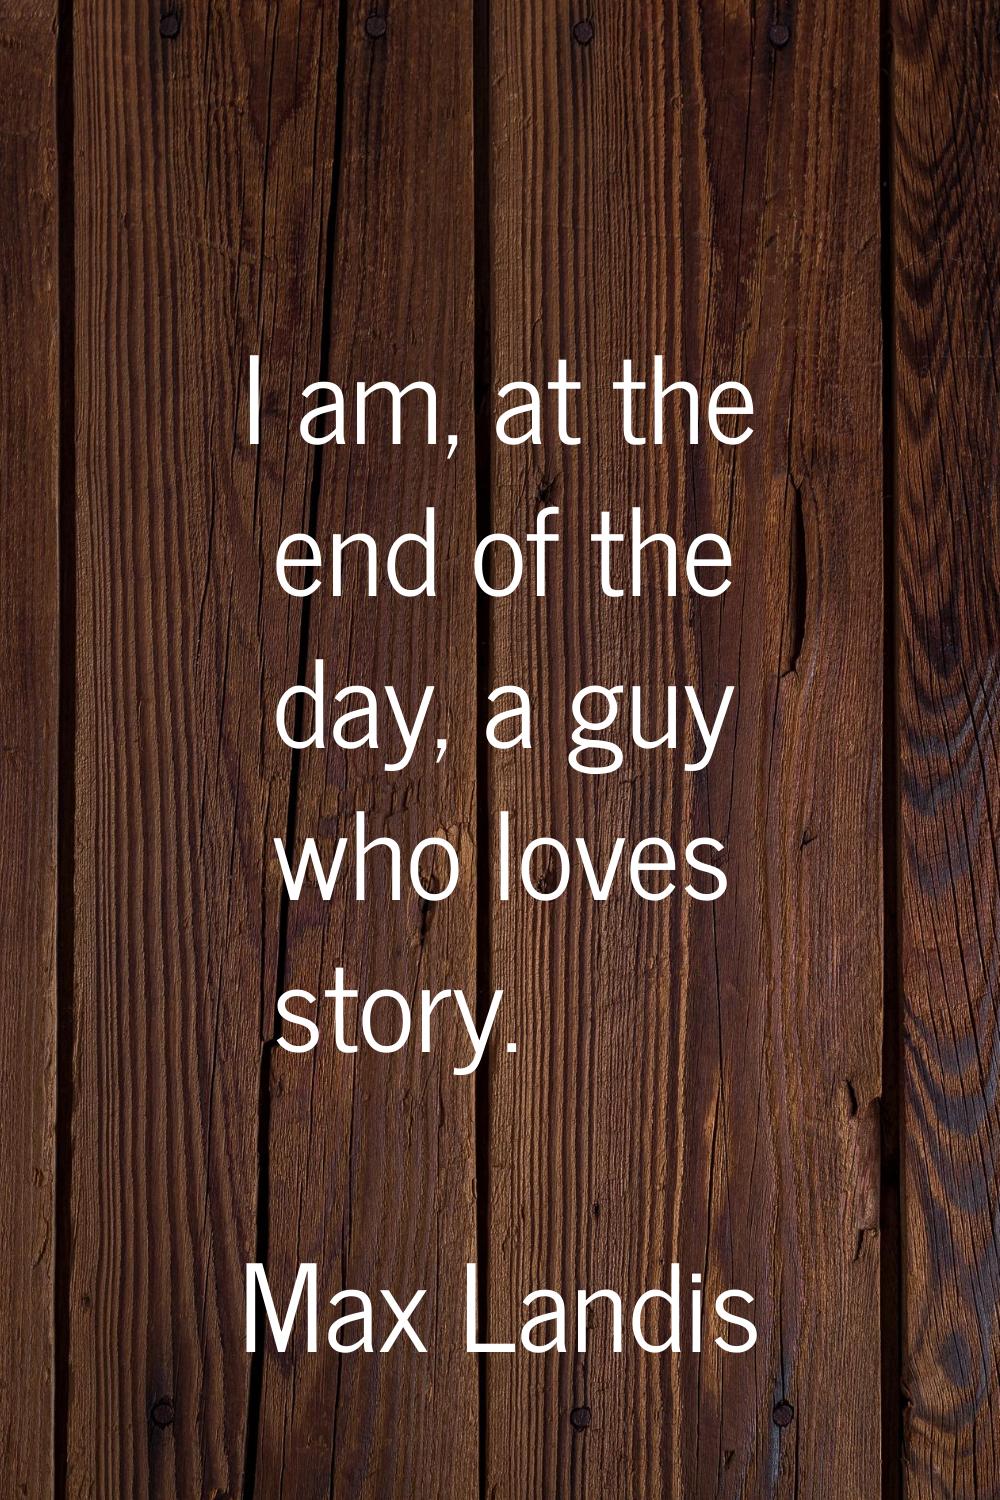 I am, at the end of the day, a guy who loves story.